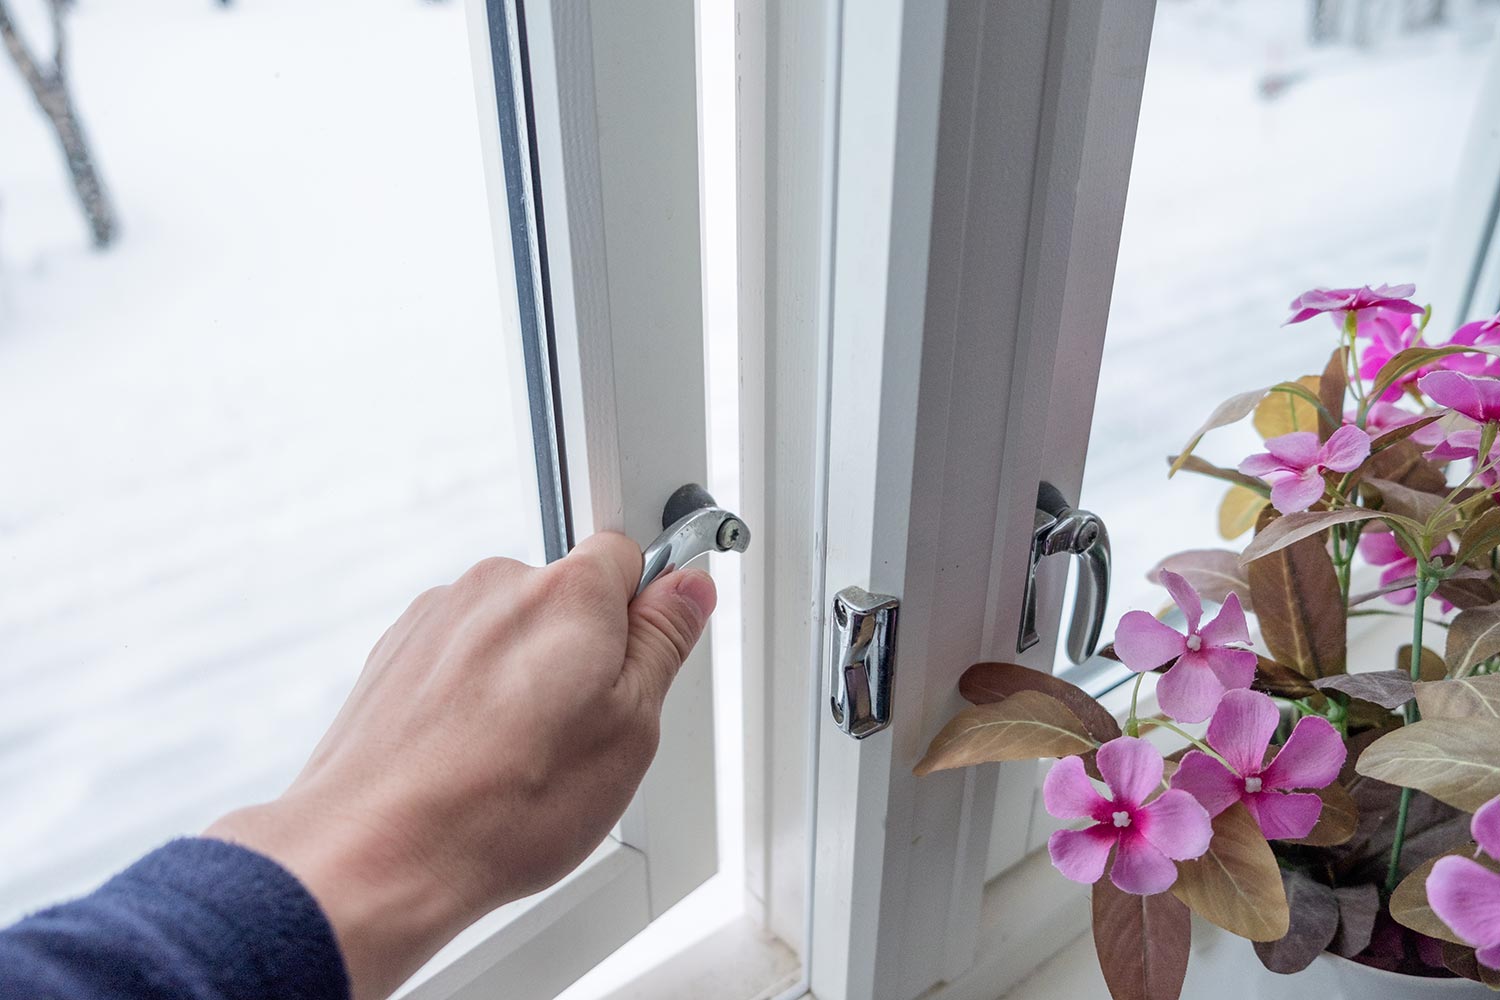 Hand opening window with flower decoration in winter